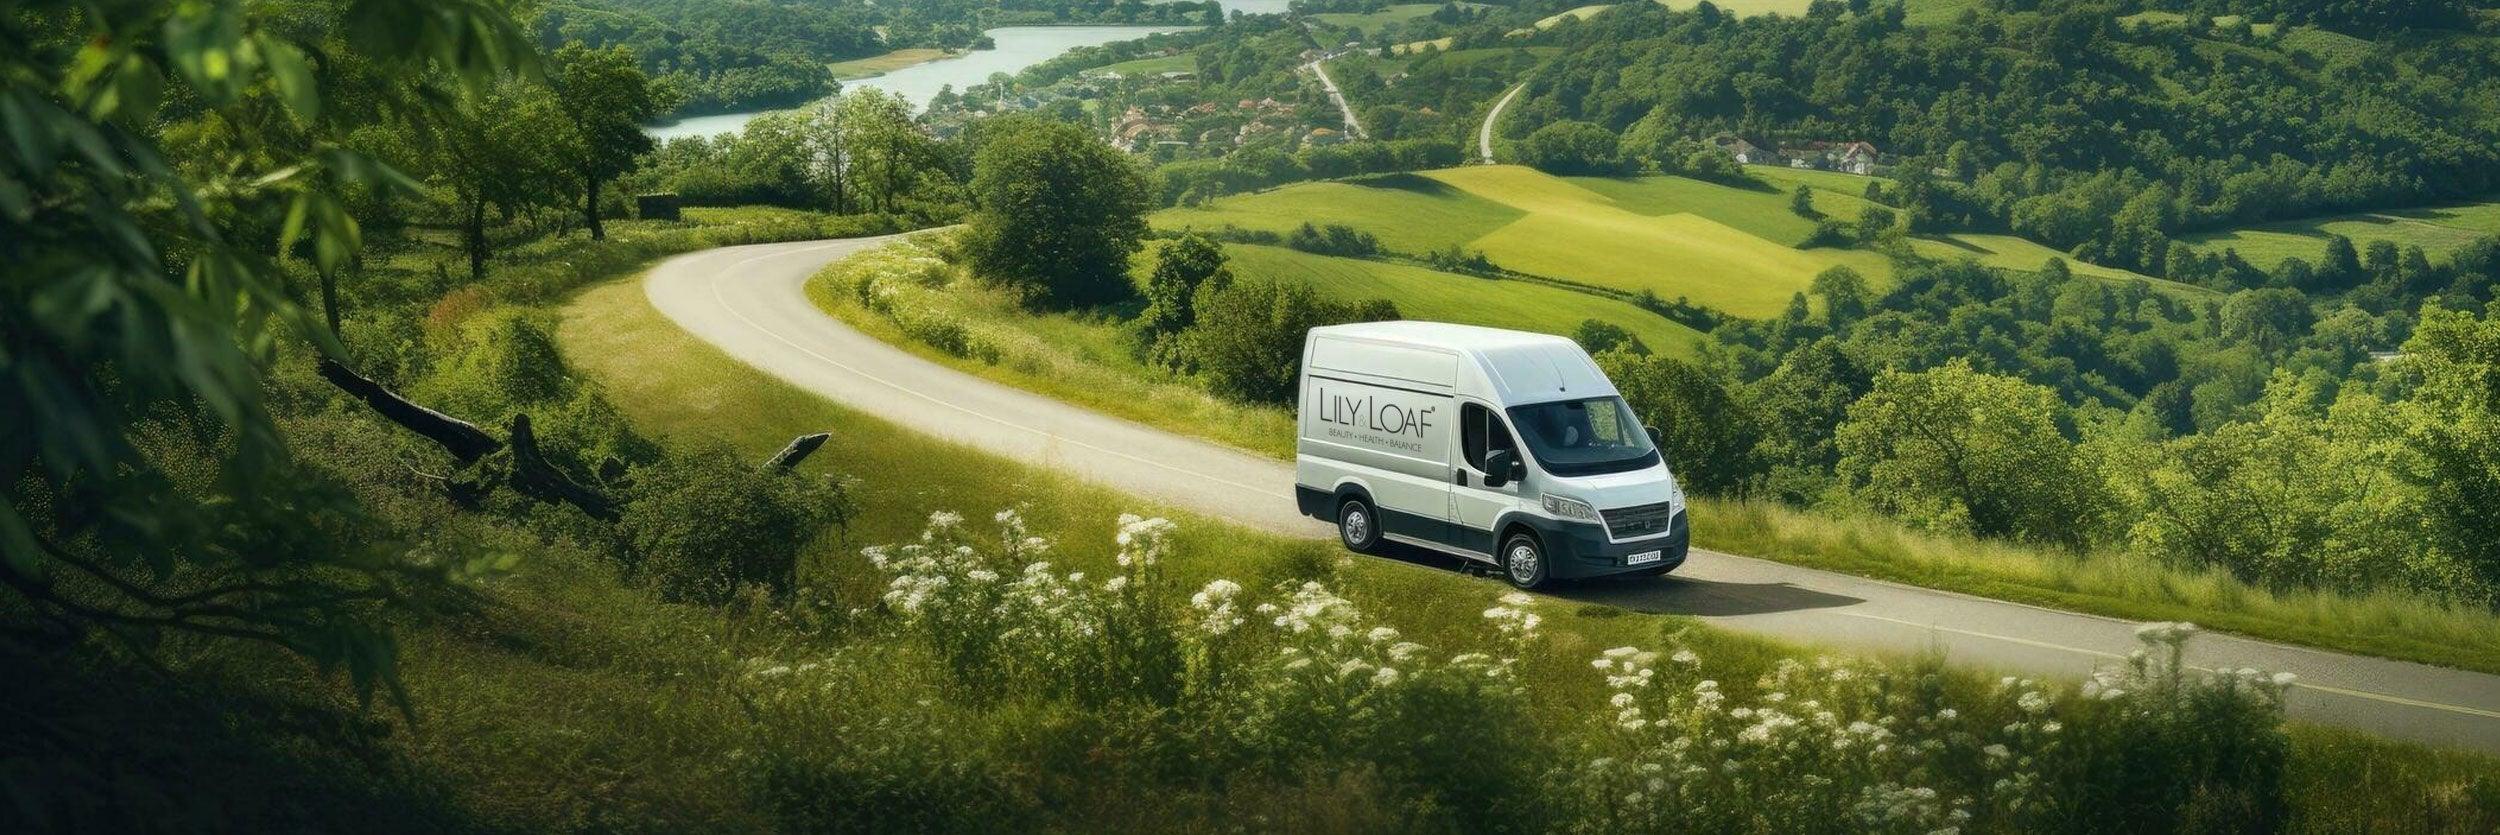 A van with the Lily & Loaf logo driving through a winding country scene with hills and valleys